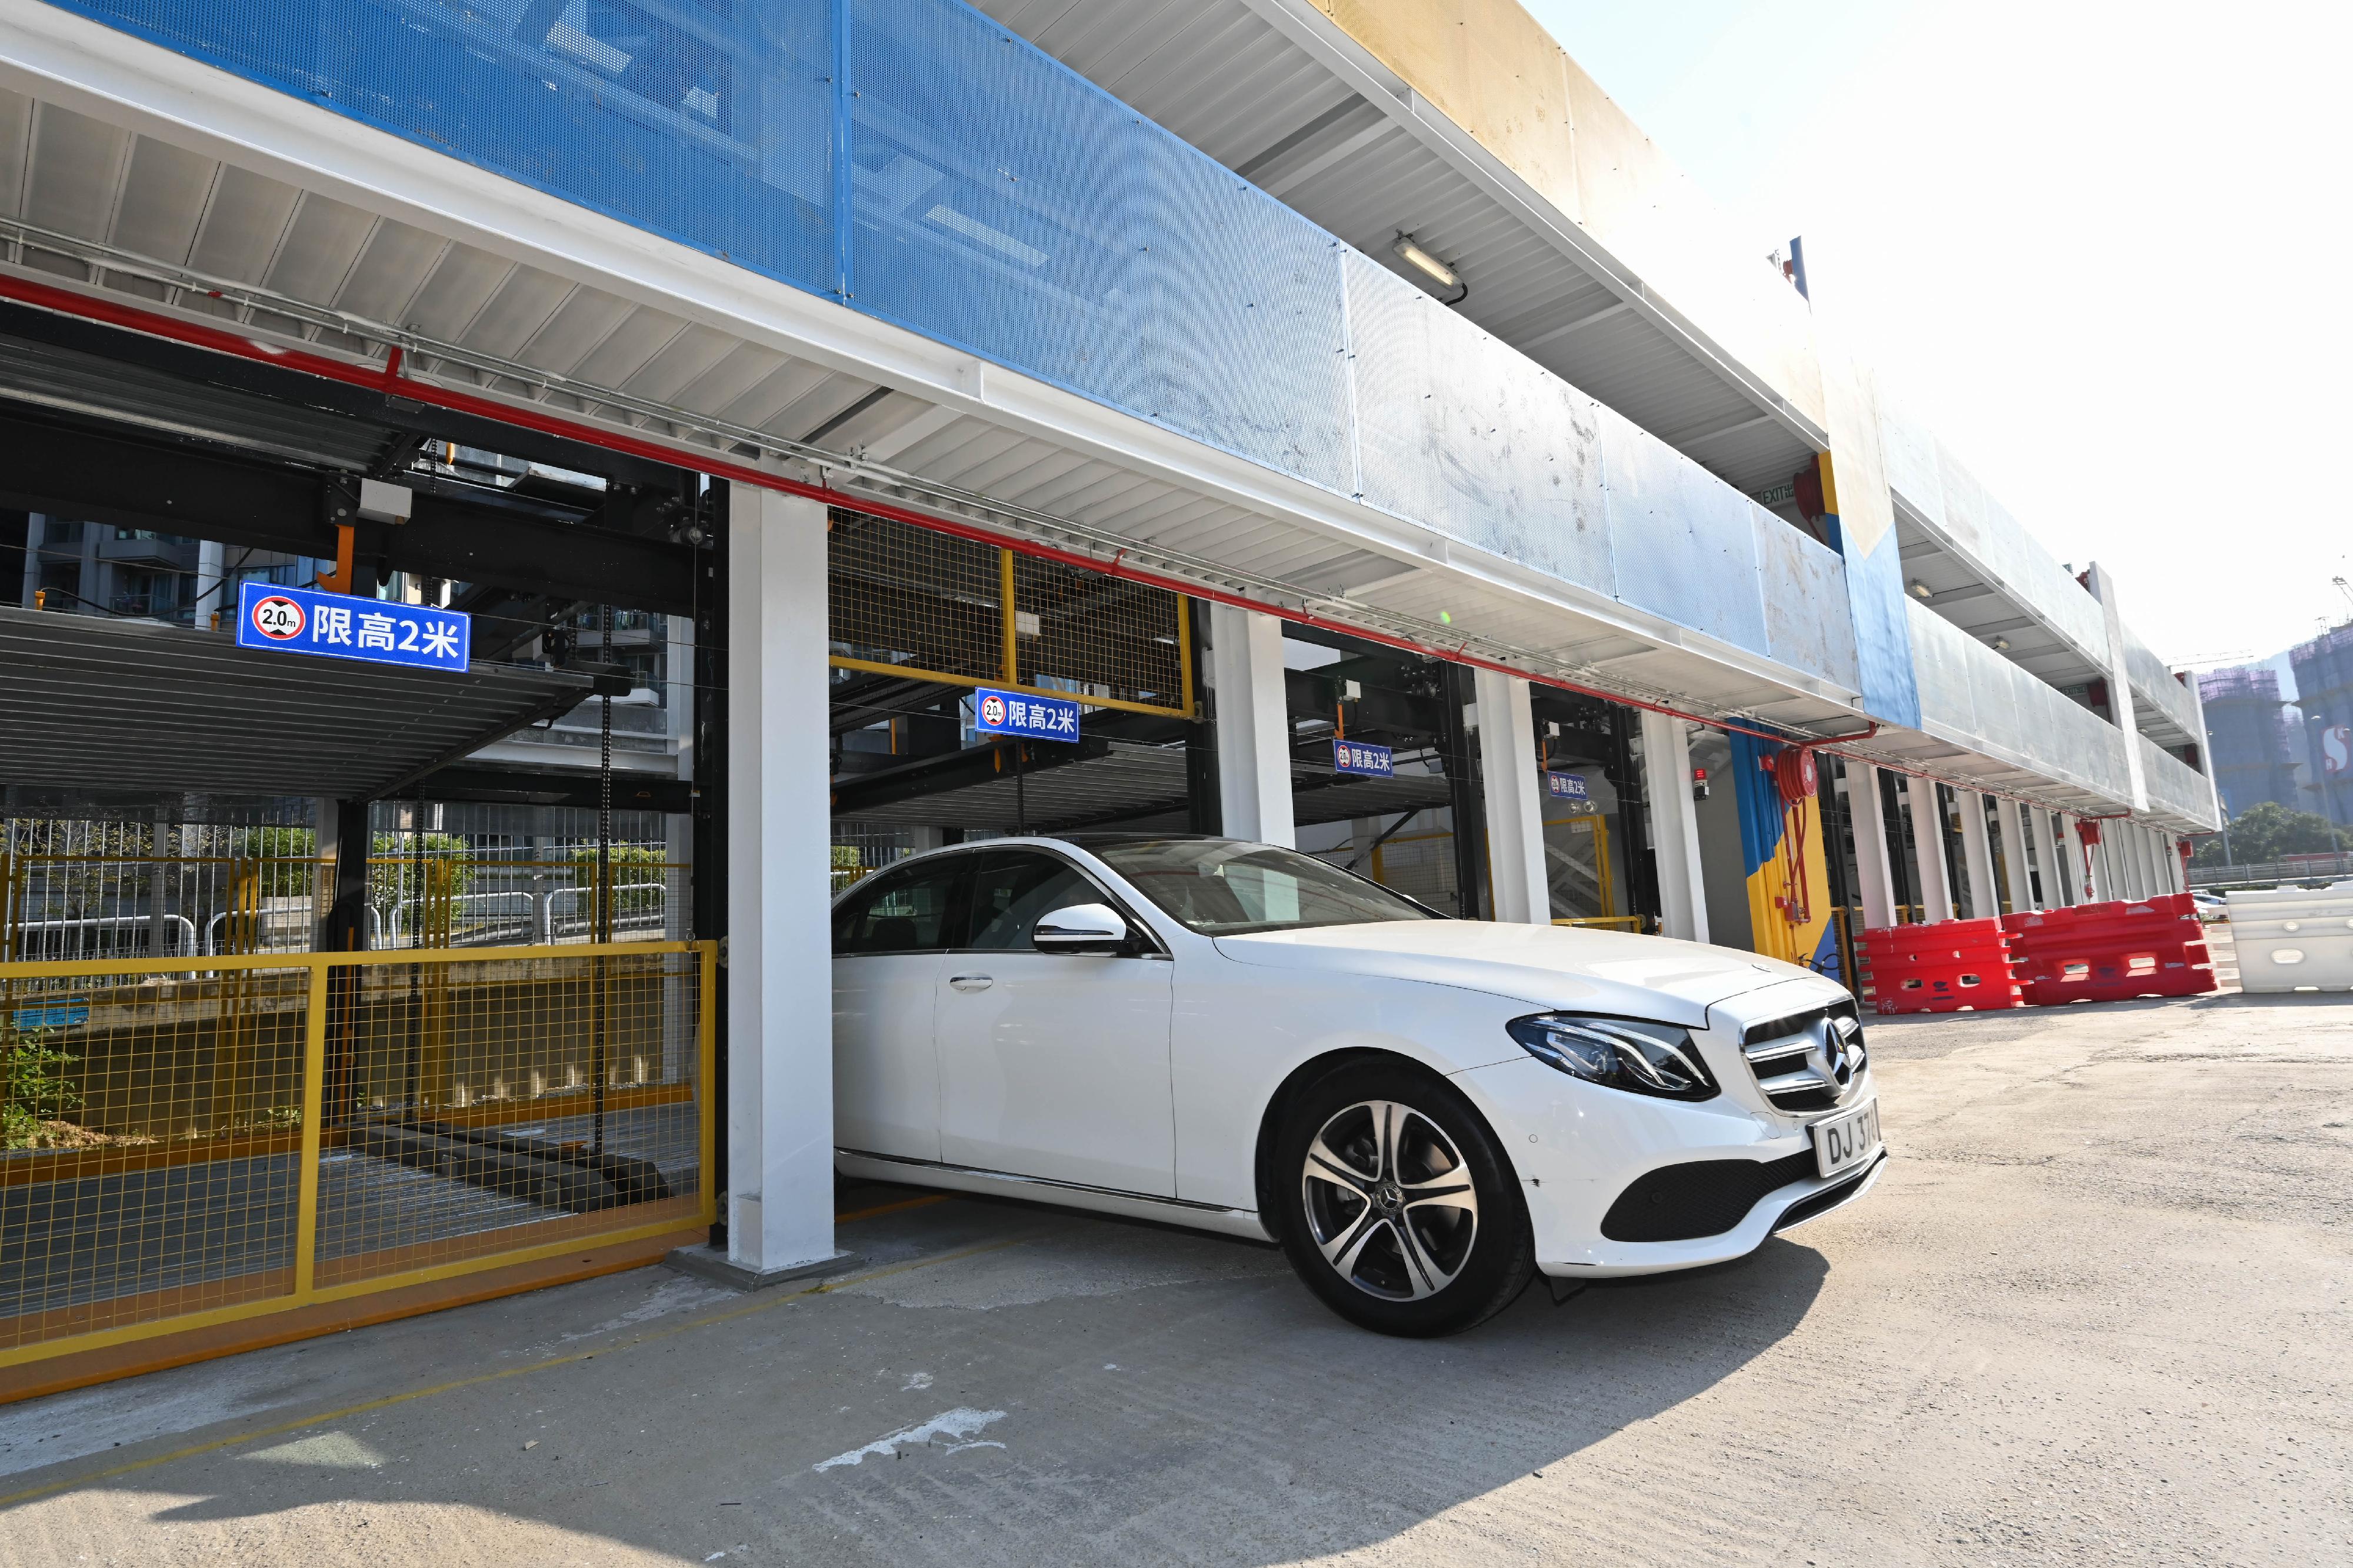 The Transport Department (TD) said today (December 30) that the automated parking system (APS) in a short-term tenancy (STT) car park located at Fo Shing Road, Pak Shek Kok, Tai Po, will commence operation tomorrow (December 31). This is the second APS project in an STT car park that the TD is taking forward to further increase the number of parking spaces and spatial efficiency.